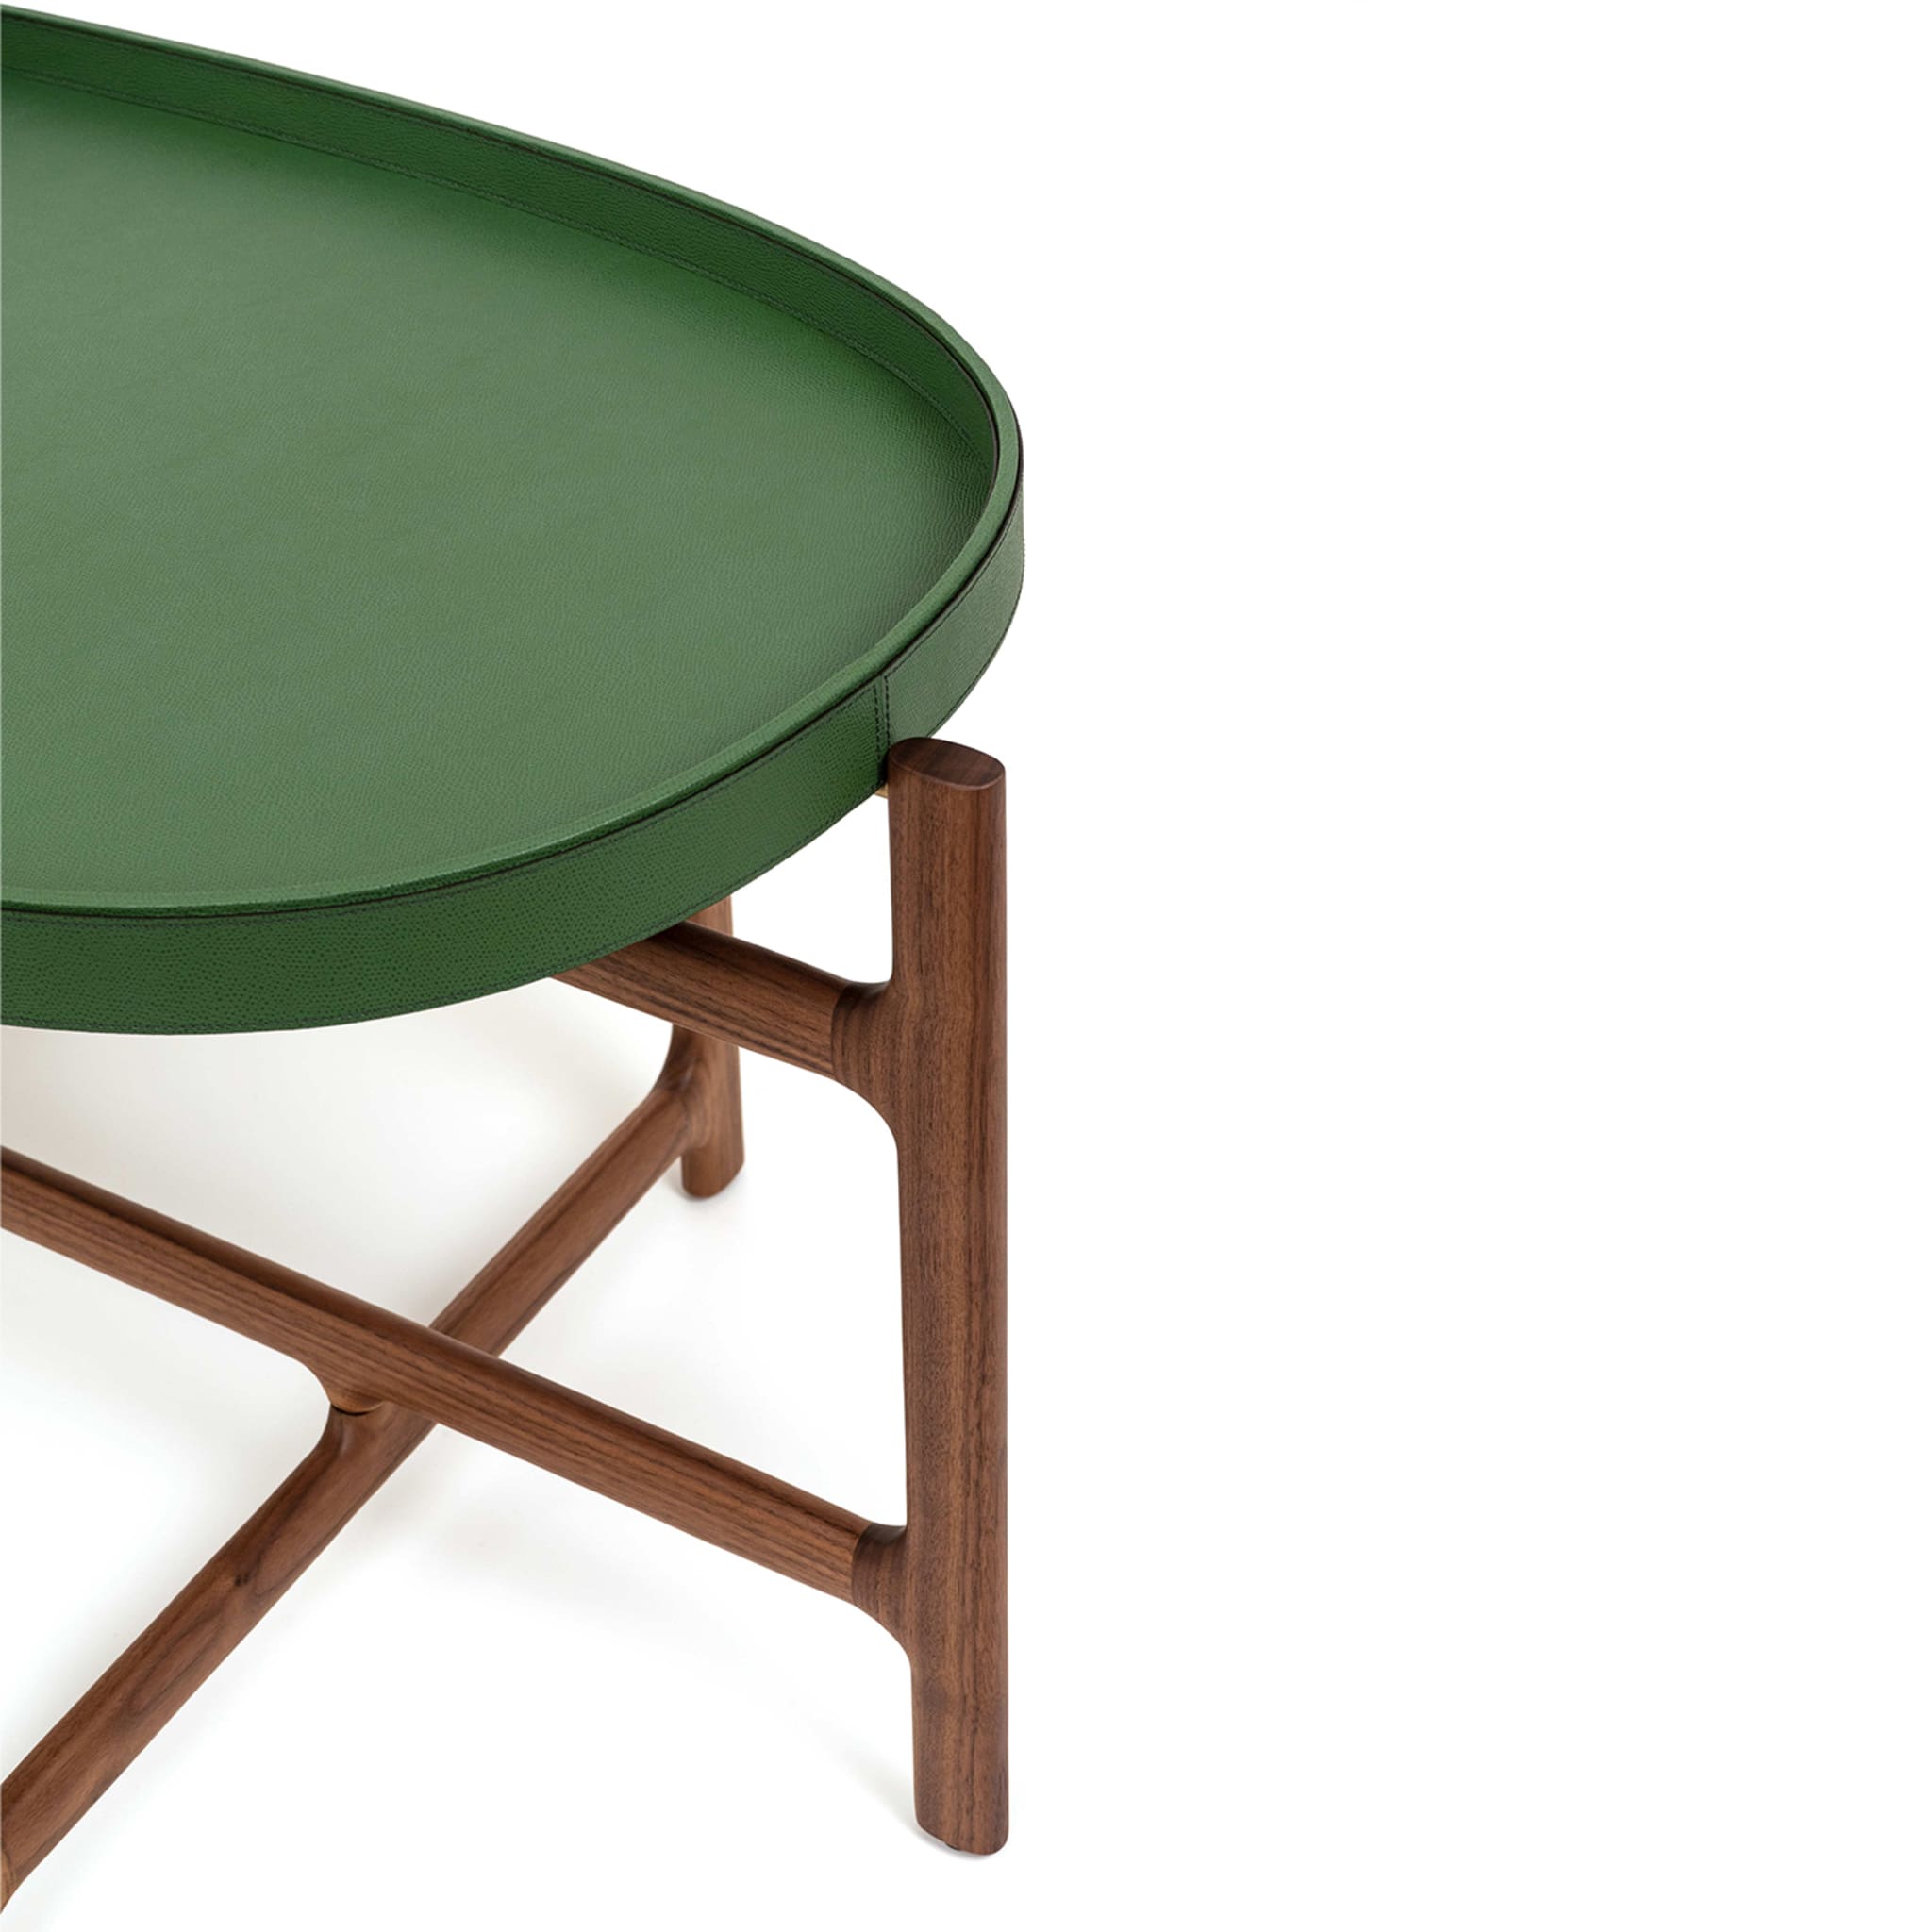 Chelsea Large Green Folding Table - Alternative view 2